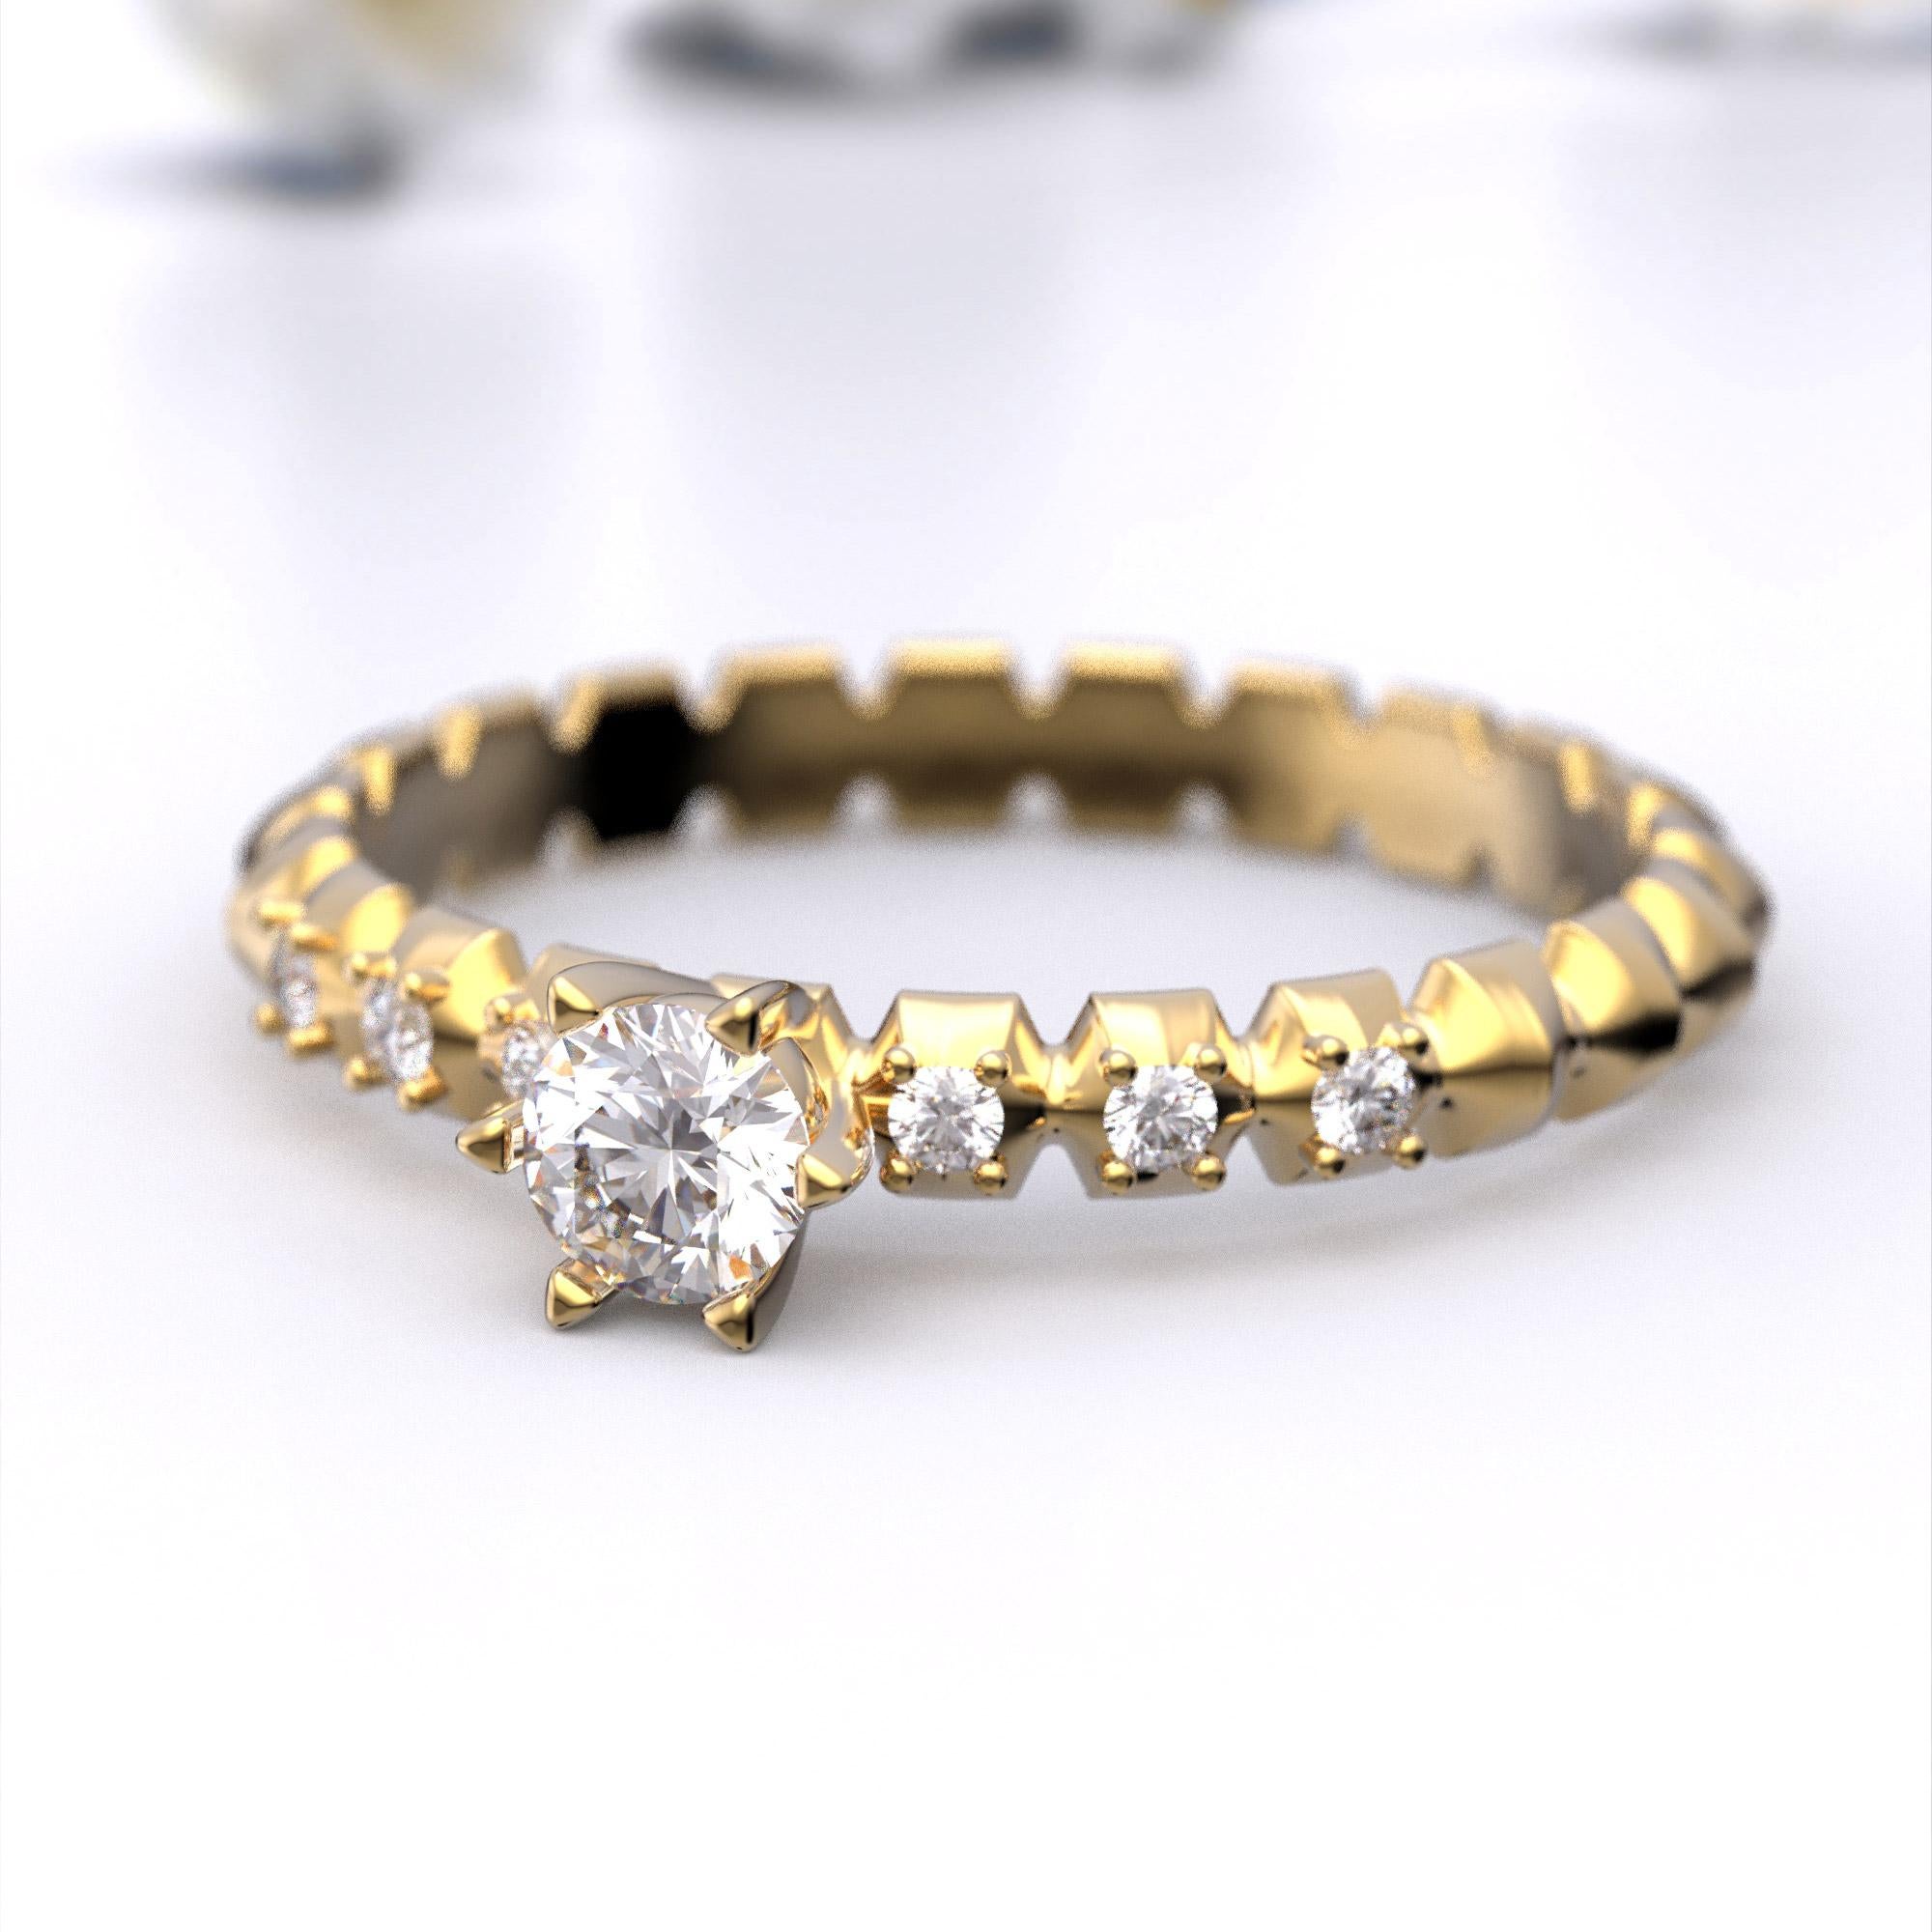 For Sale:  Italian-Made 0.32 Carat Diamond Engagement Ring in 14k Solid Gold 5